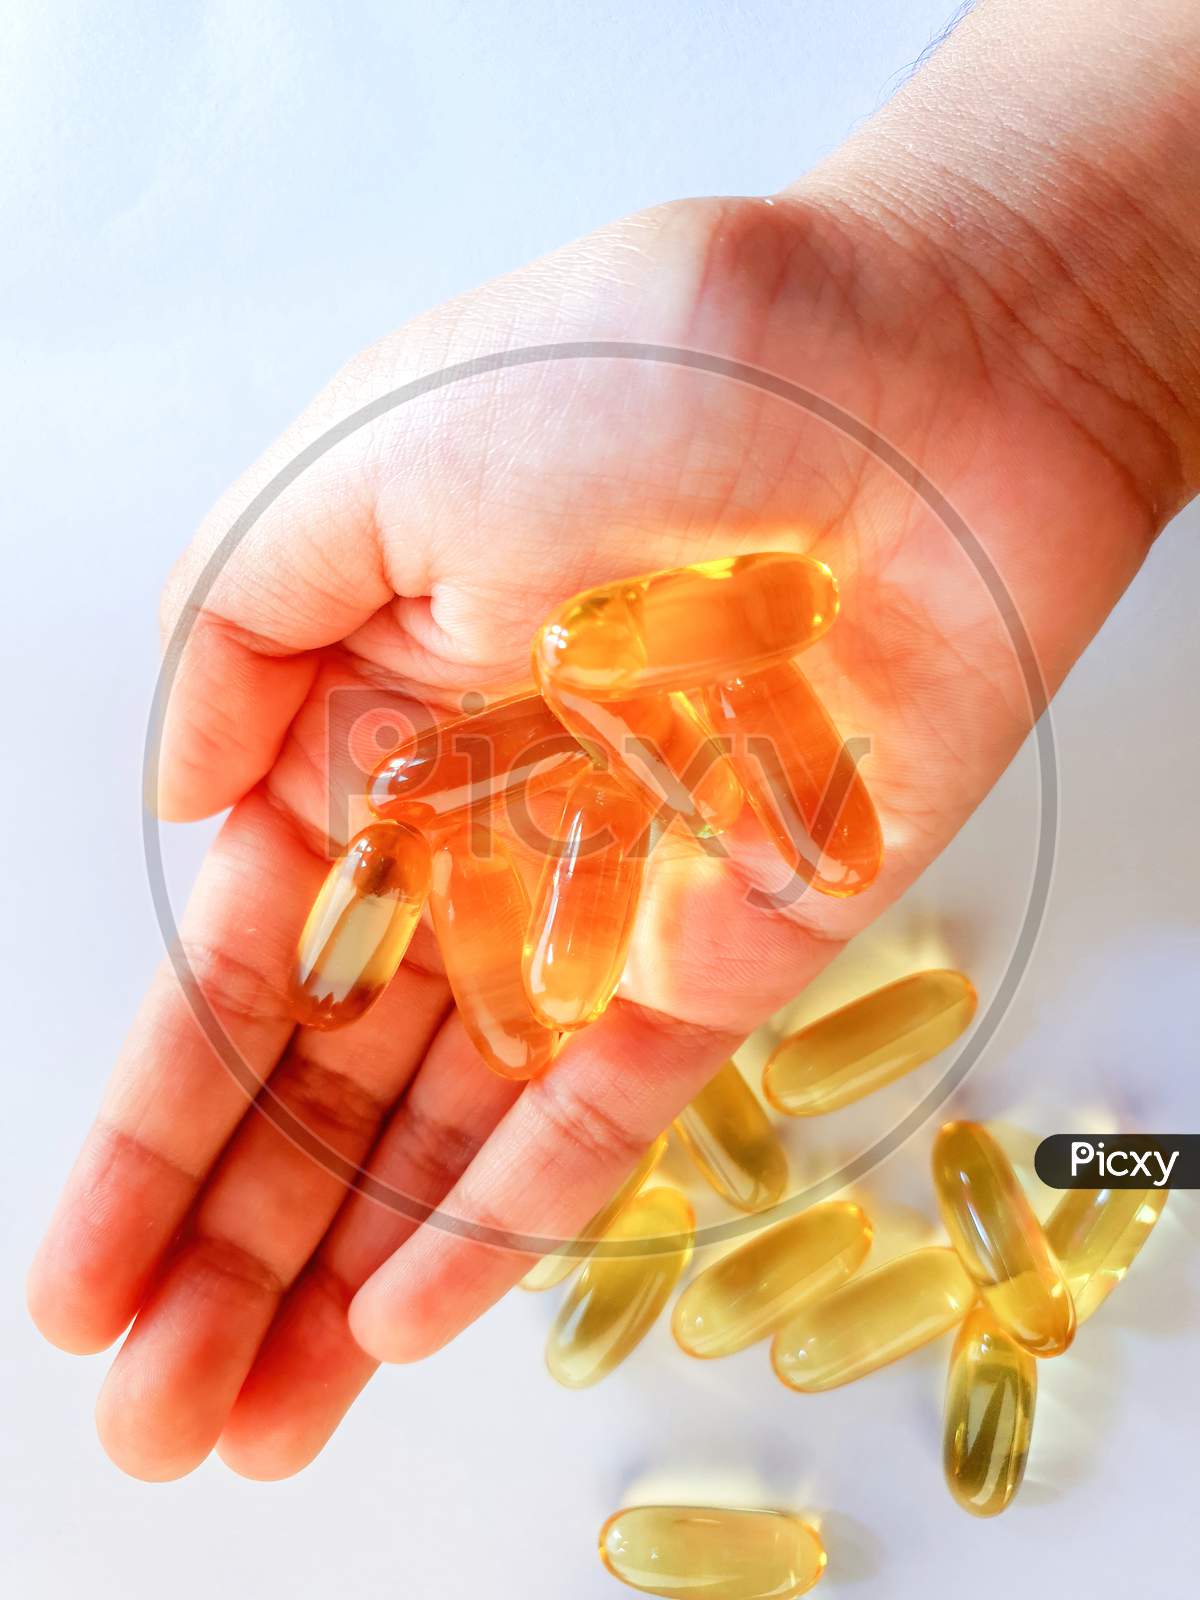 Fish Oil Capsules With Omega 3 And Vitamin D For Daily Supplement, Healthy Diet, Holding On Hand